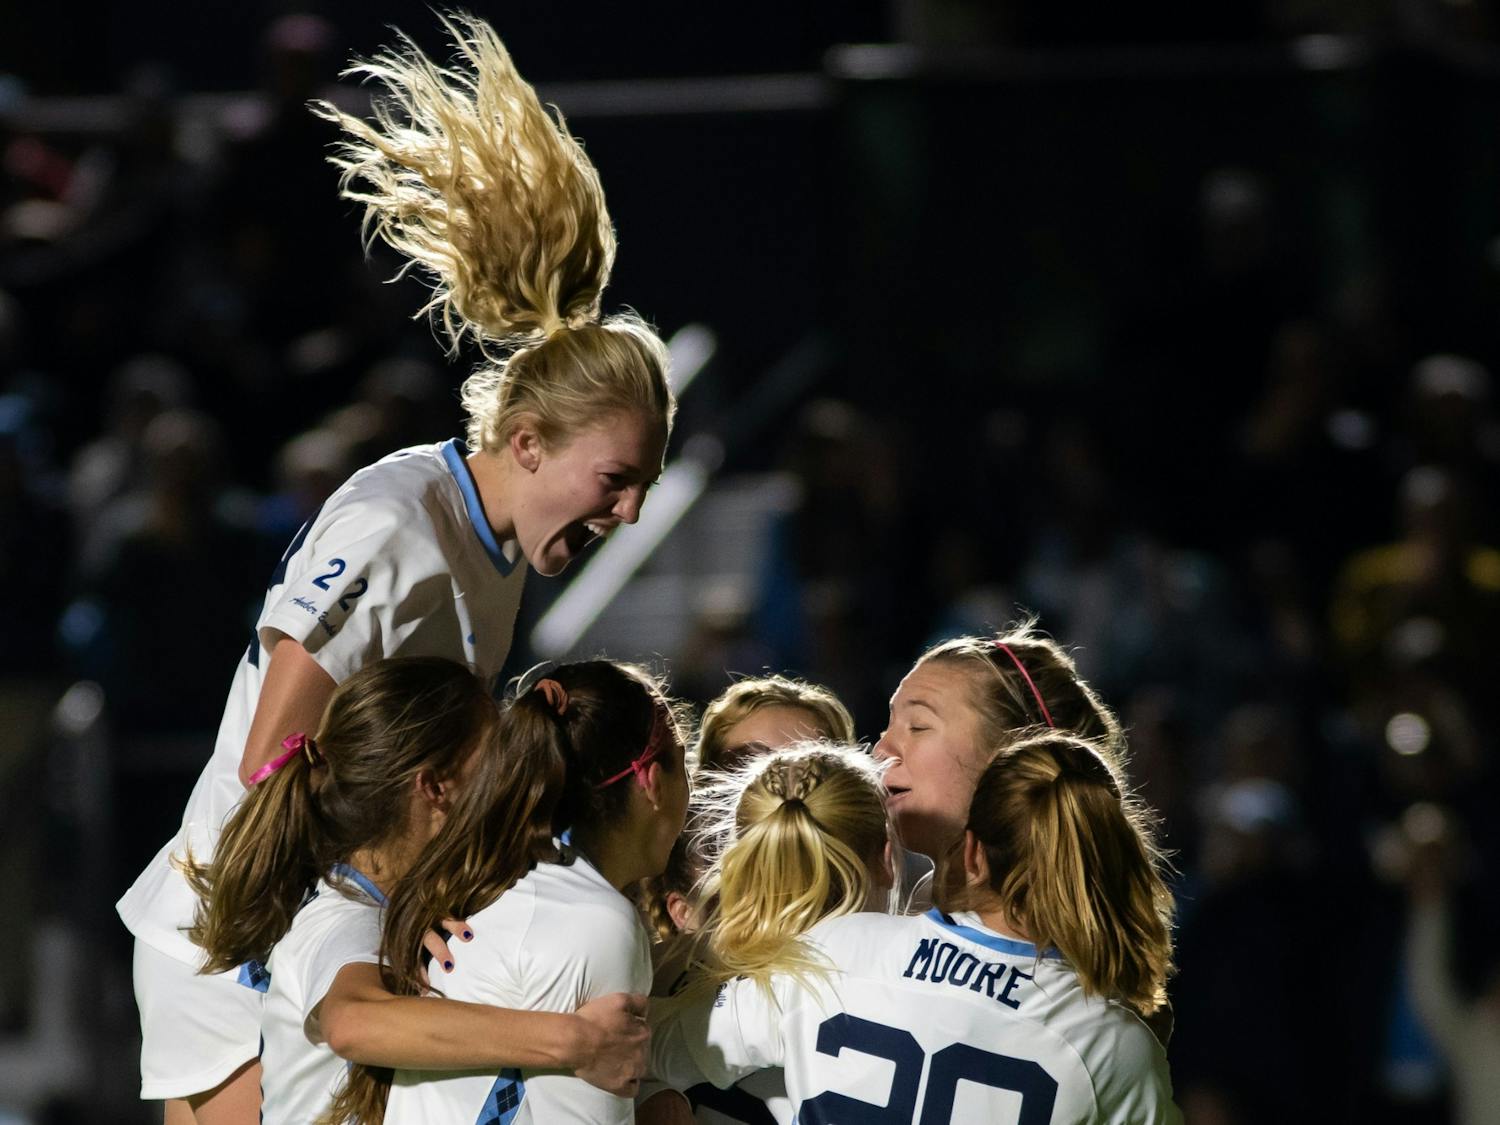 UNC celebrates their first goal during their game against UCLA in the NCAA Finals at WakeMed Soccer Park on Friday, Dec. 5, 2022. UNC lost 3-2 in 2OT.